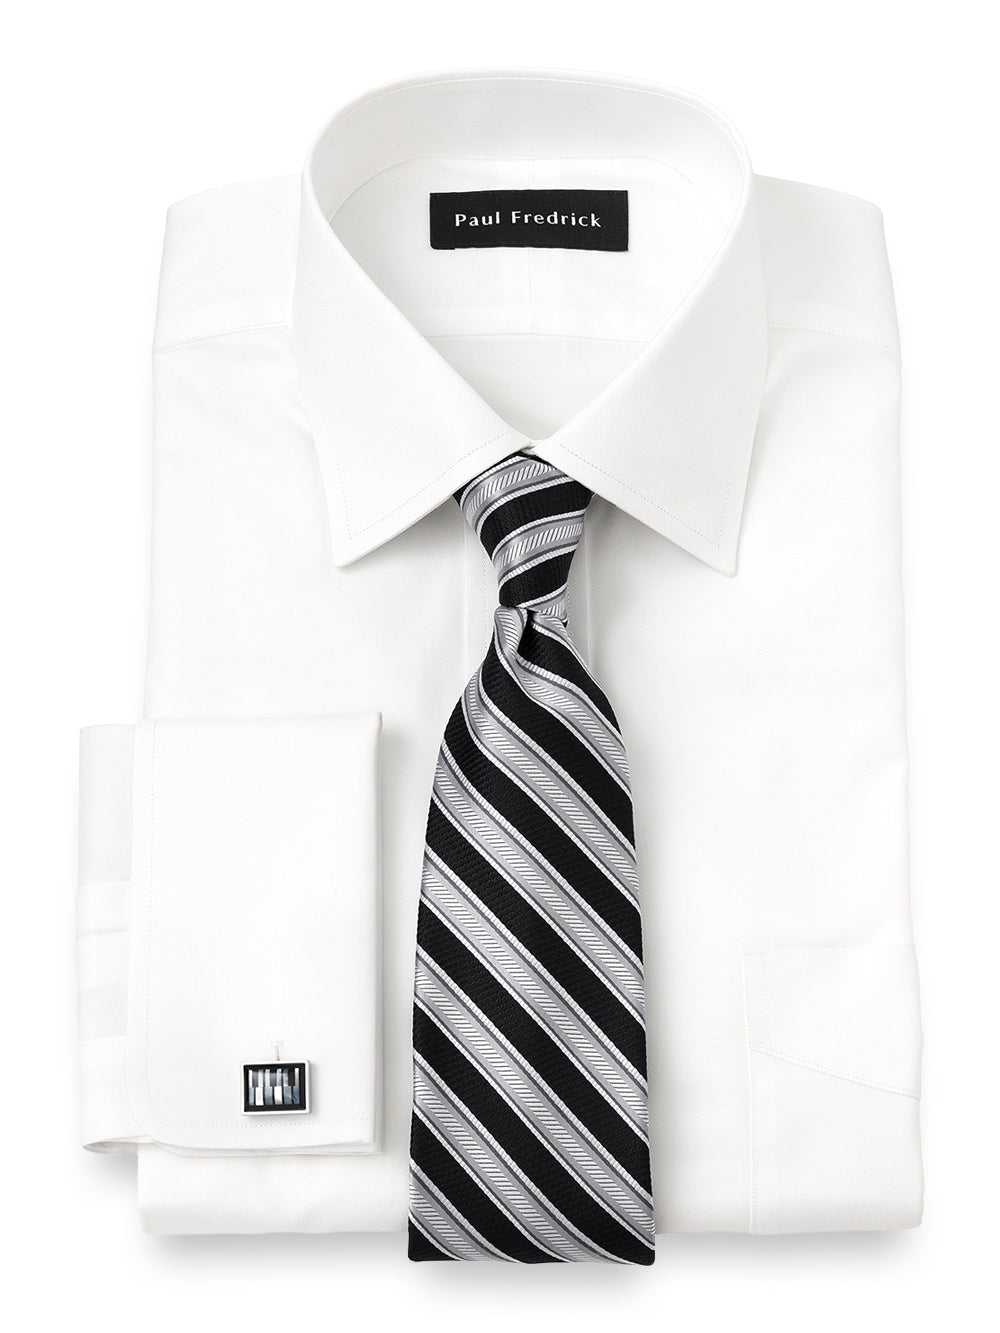 Paul Fredrick, Superfine Egyptian Cotton Solid Color Spread Collar French Cuff Dress Shirt | Clearance